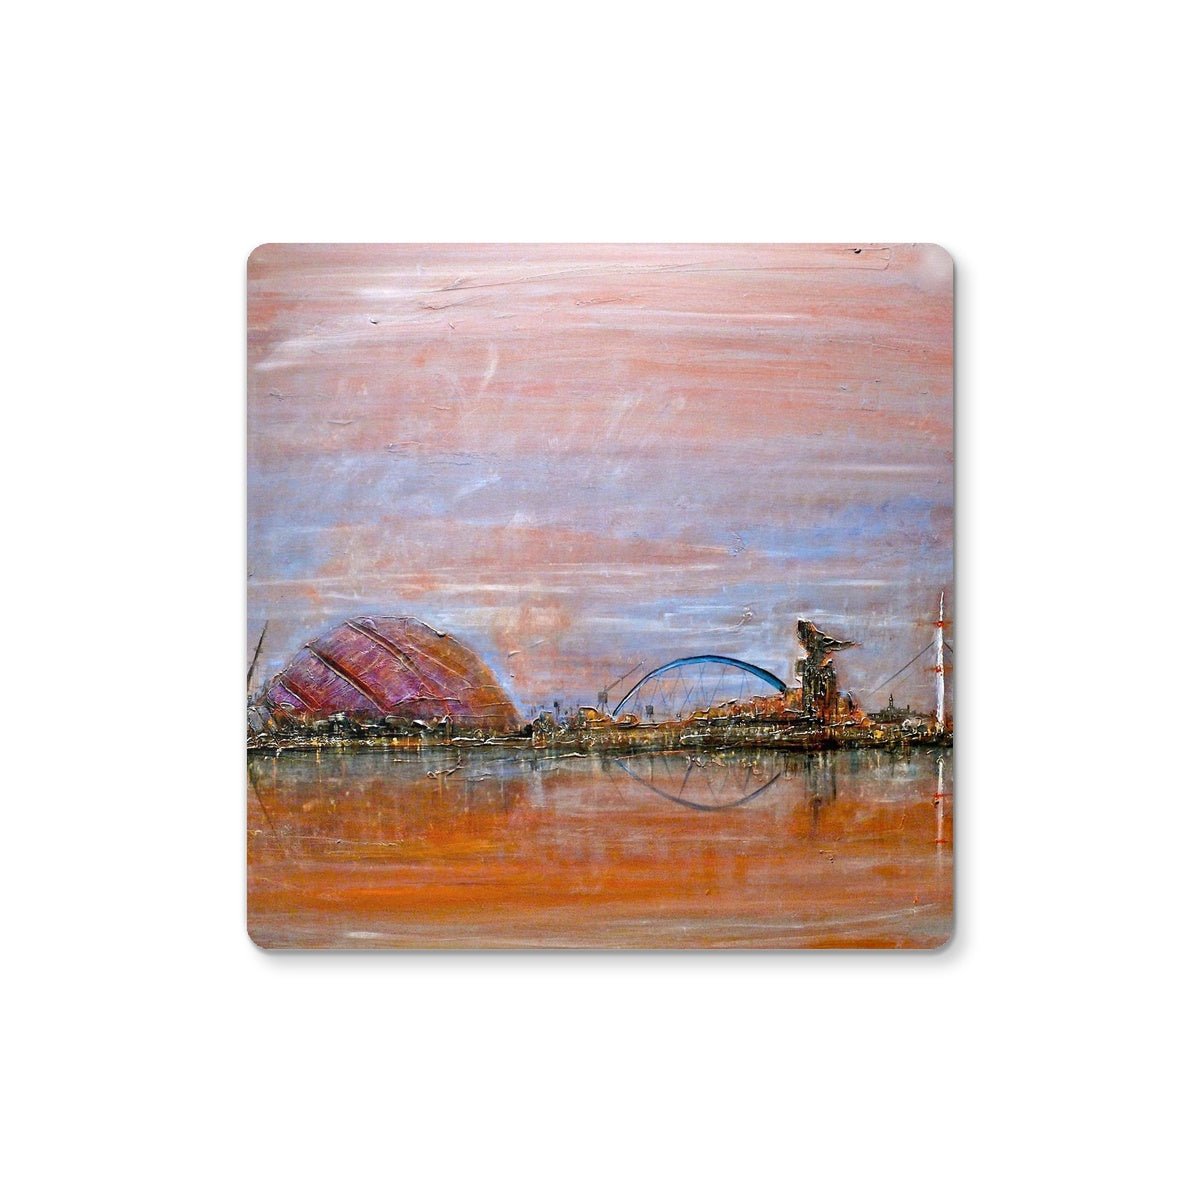 Glasgow Harbour Art Gifts Coaster-Coasters-Edinburgh & Glasgow Art Gallery-6 Coasters-Paintings, Prints, Homeware, Art Gifts From Scotland By Scottish Artist Kevin Hunter